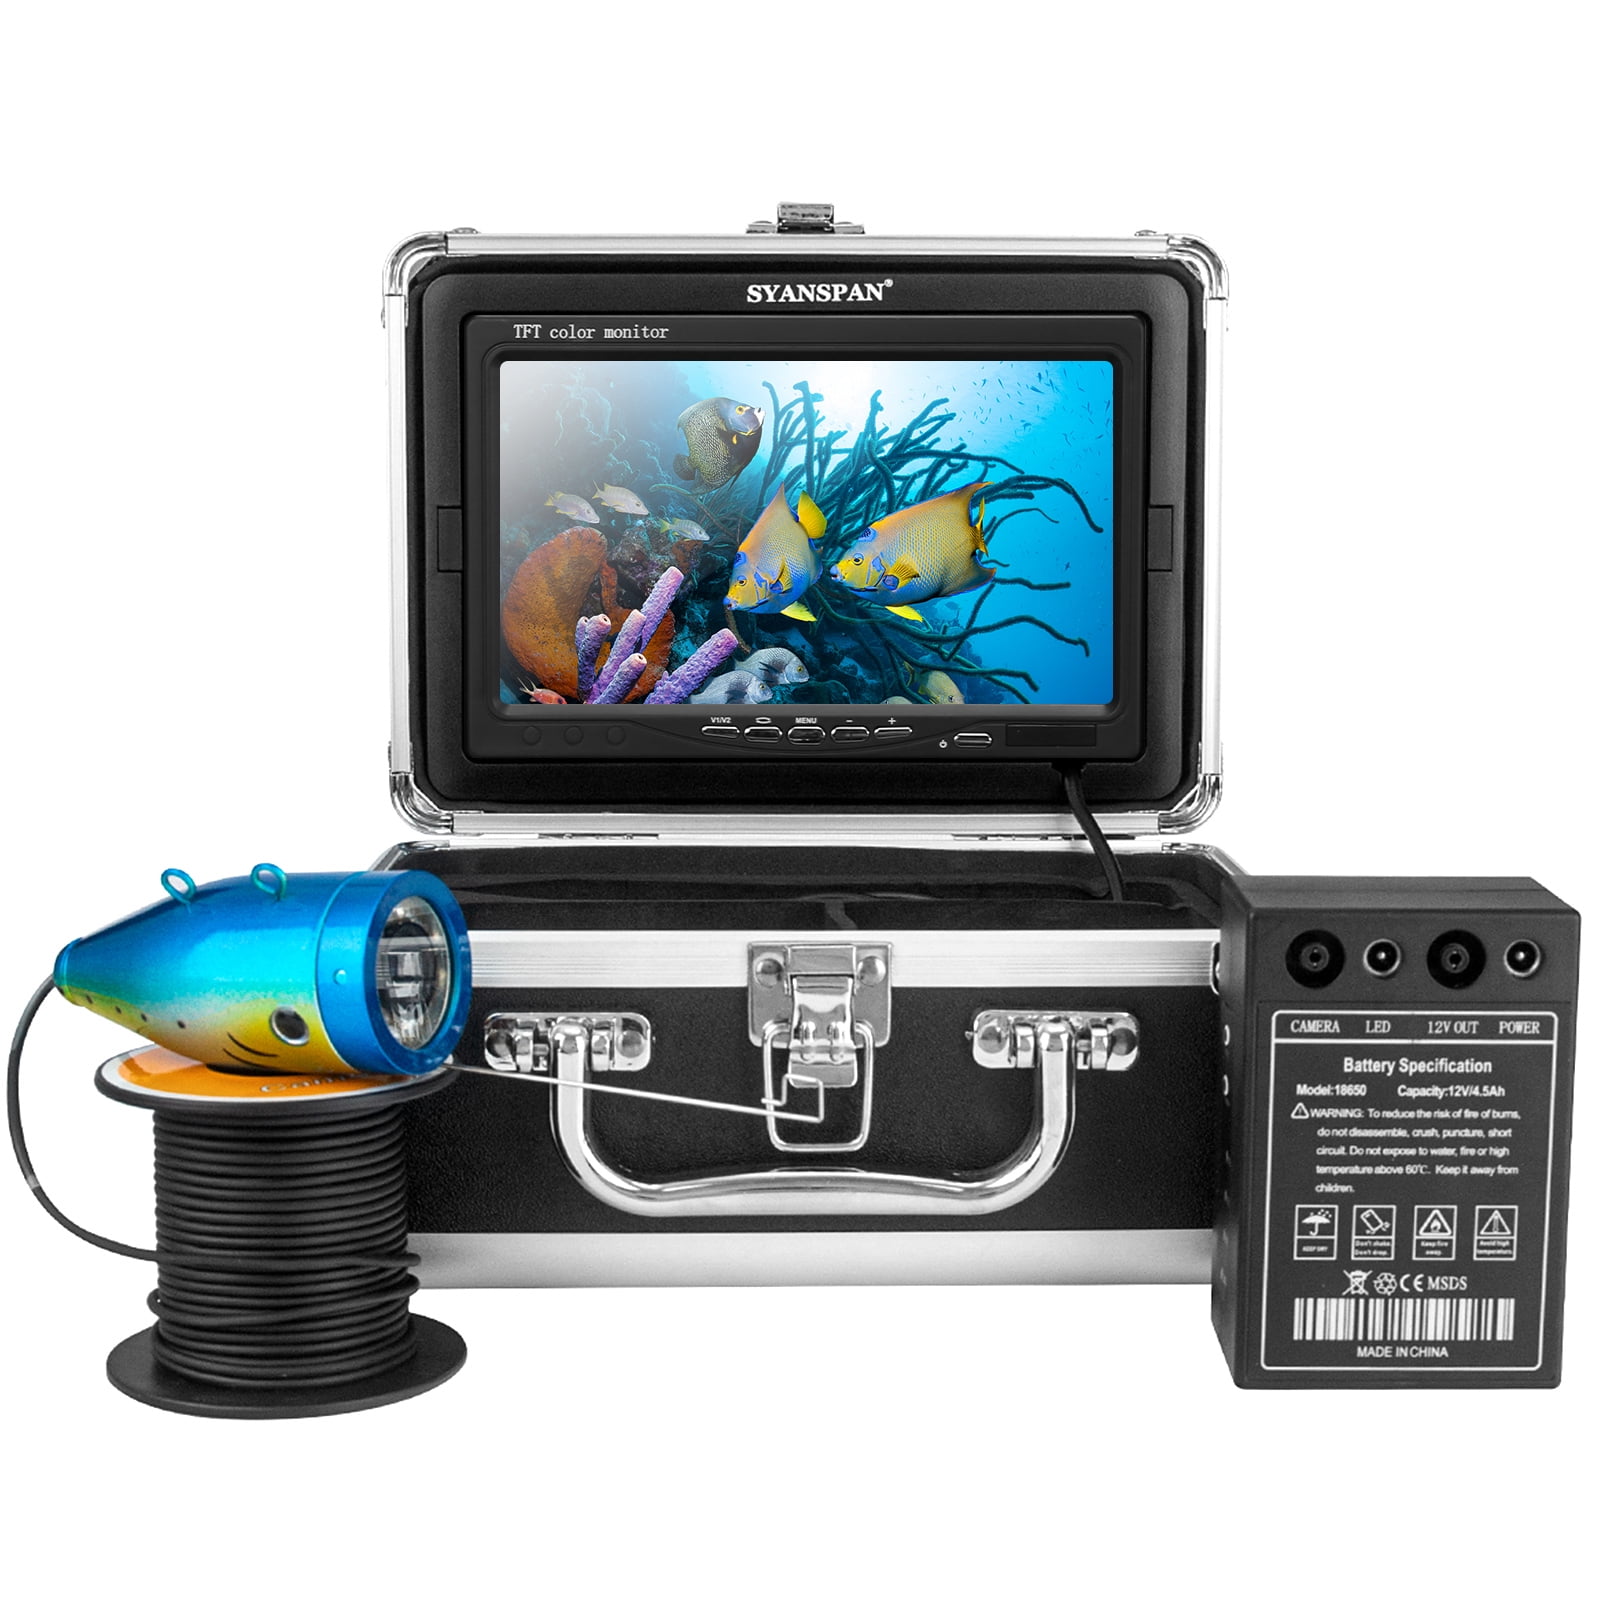 360 Degree Rotation Underwater Fishing Camera, DC 12V Fish Finder Video  Camera, For Ice Fishing For Well Inspection 